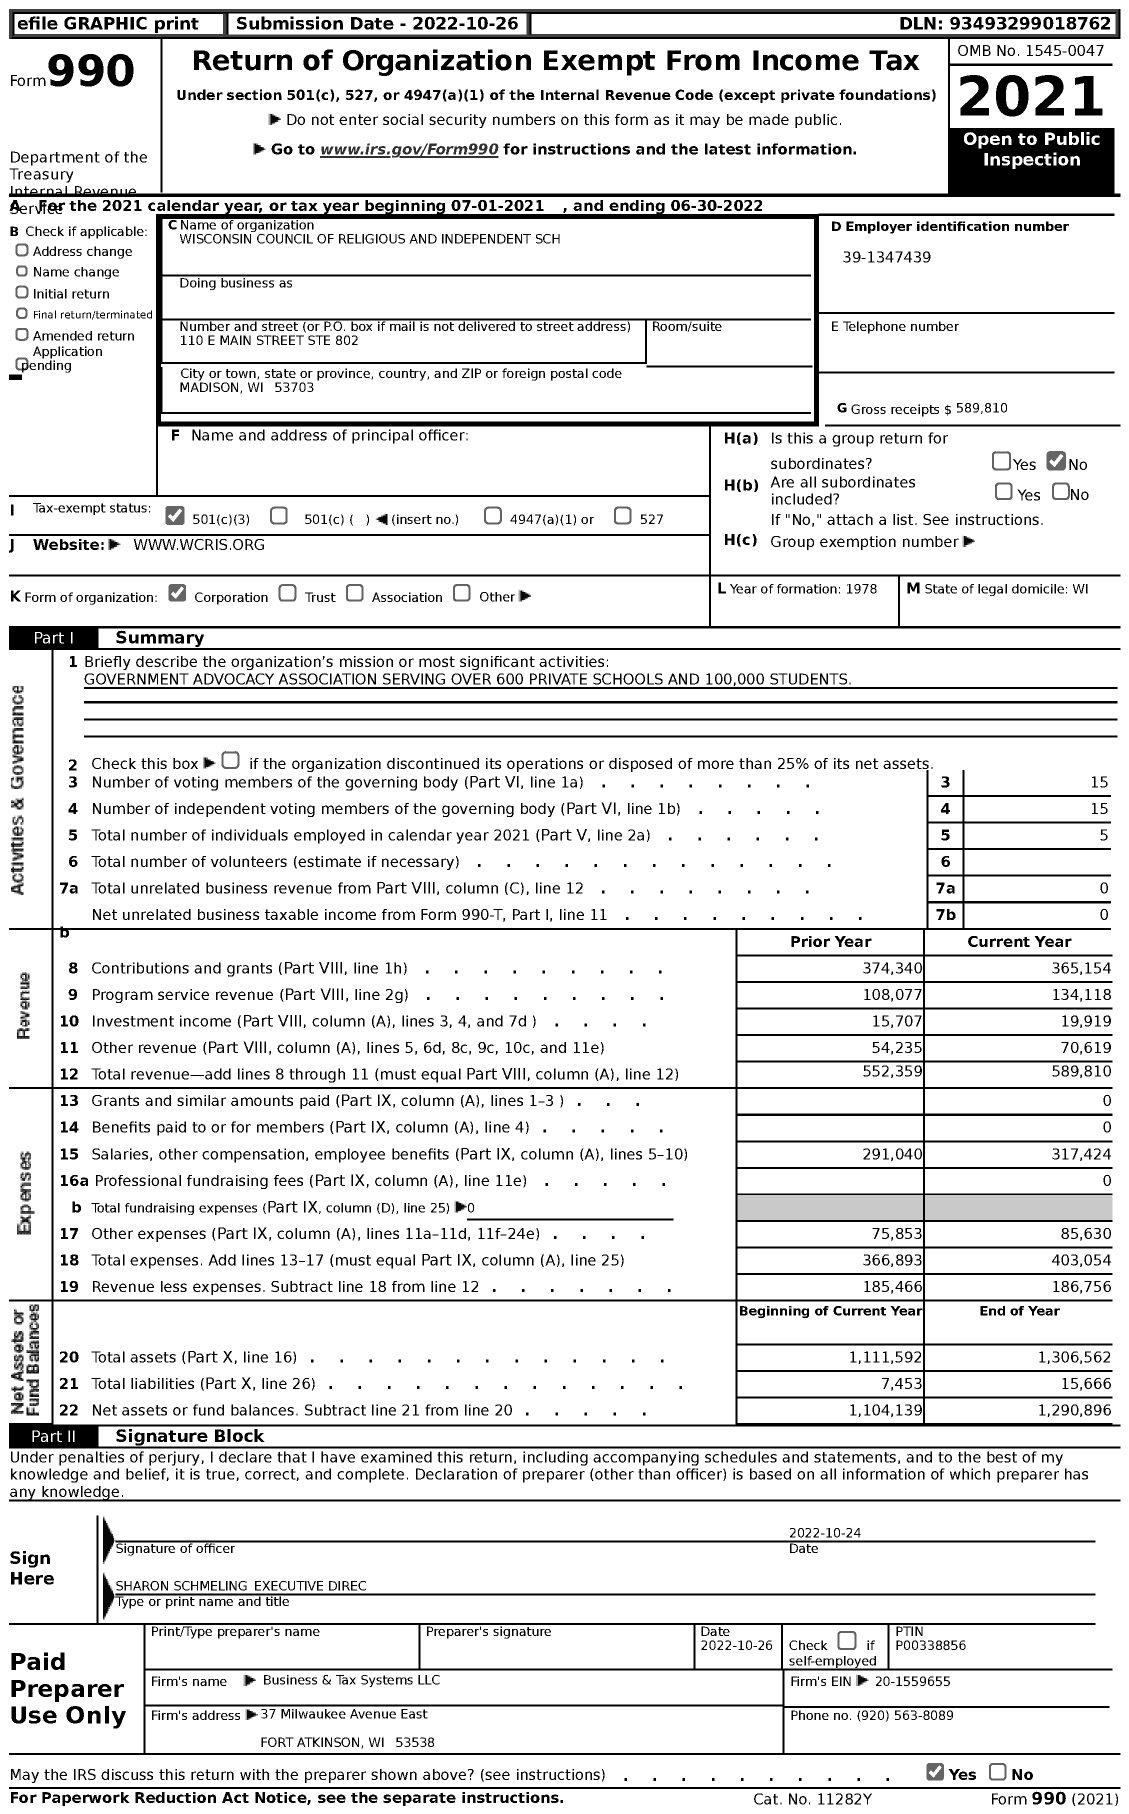 Image of first page of 2021 Form 990 for Wisconsin Council of Religious and Independent SCH